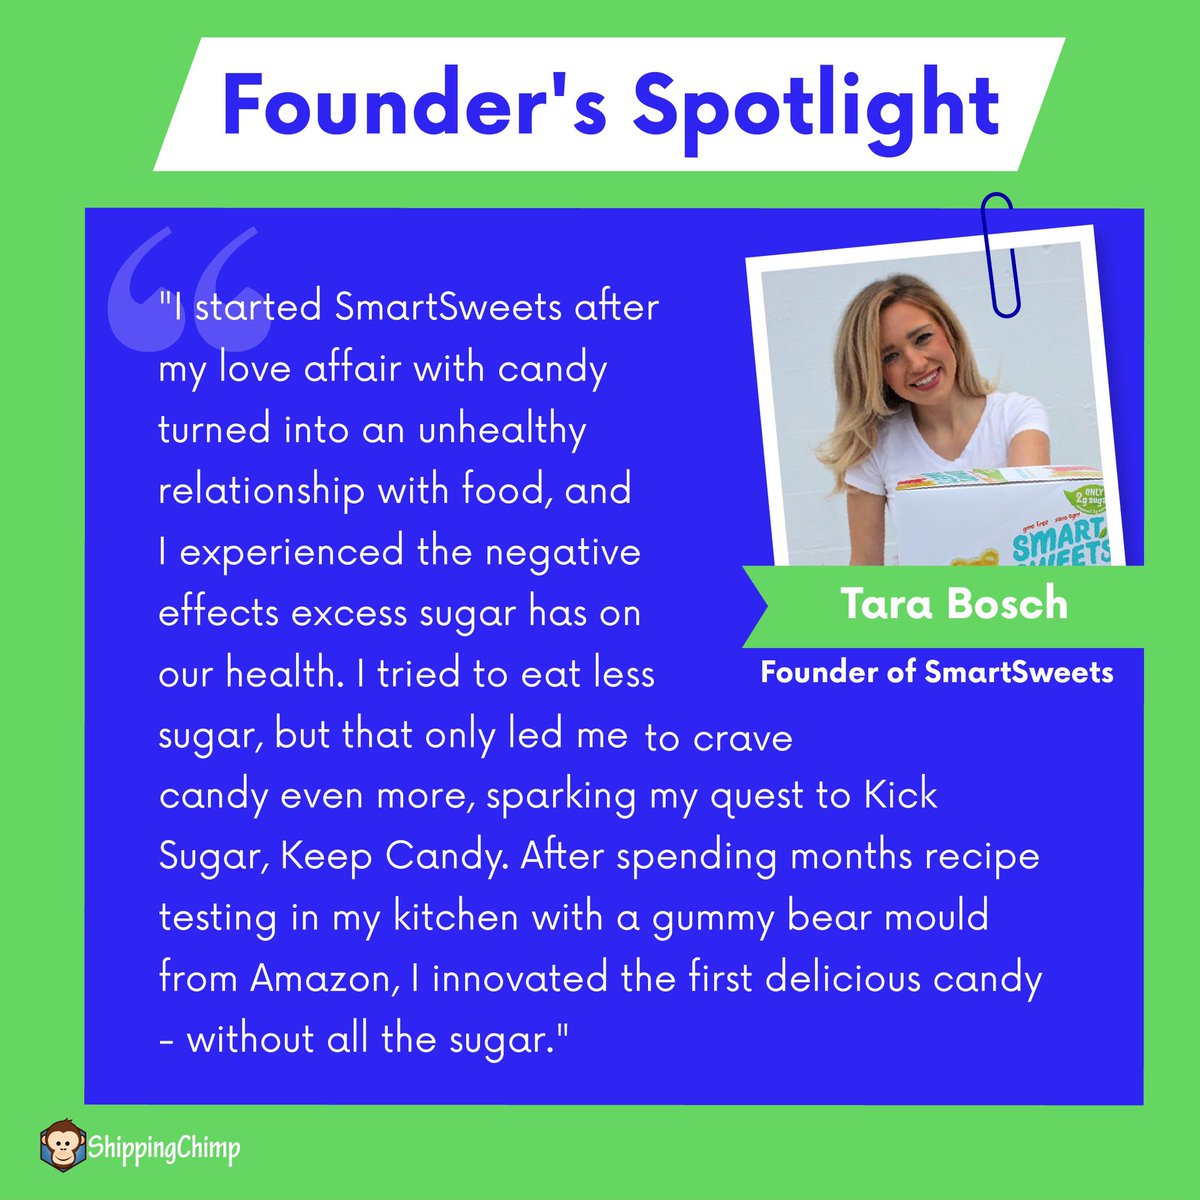 There's nothing more yum than having a sweet treat after a meal. But the side effects of sweet treats are a ton. So, the founder of @smartsweets did a smart thing. Read on!

#ecommerce #smallbusiness #founderspotlight #bfcm2022 #shippingchimp #business #canada #canadian